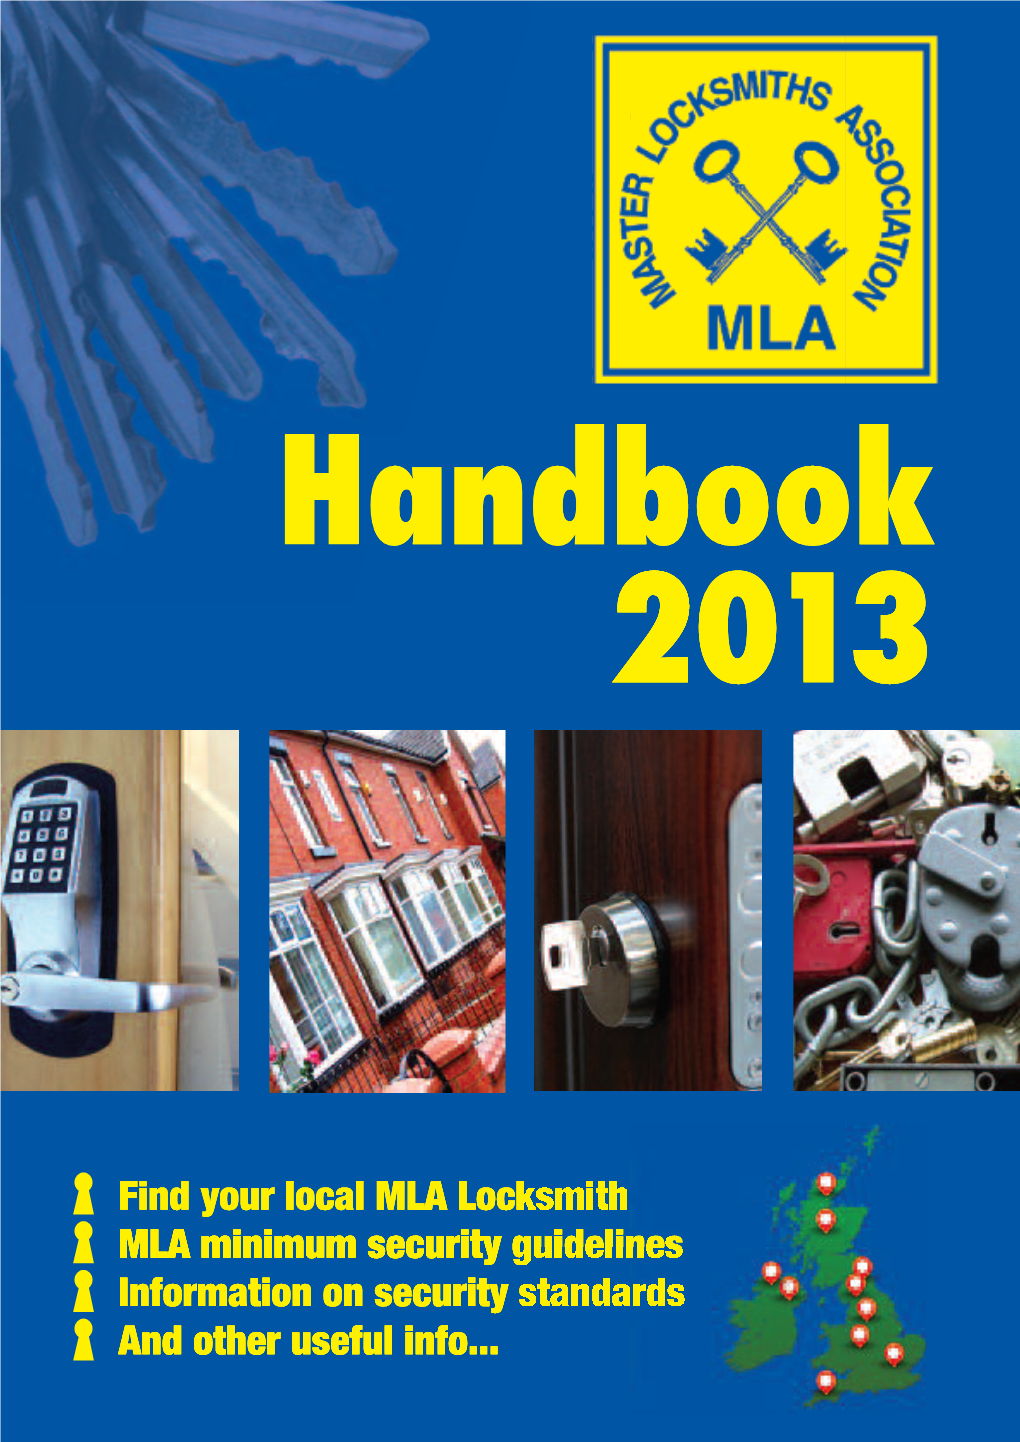 Find Your Local MLA Locksmith MLA Minimum Security Guidelines Information on Security Standards and Other Useful Info... MLA